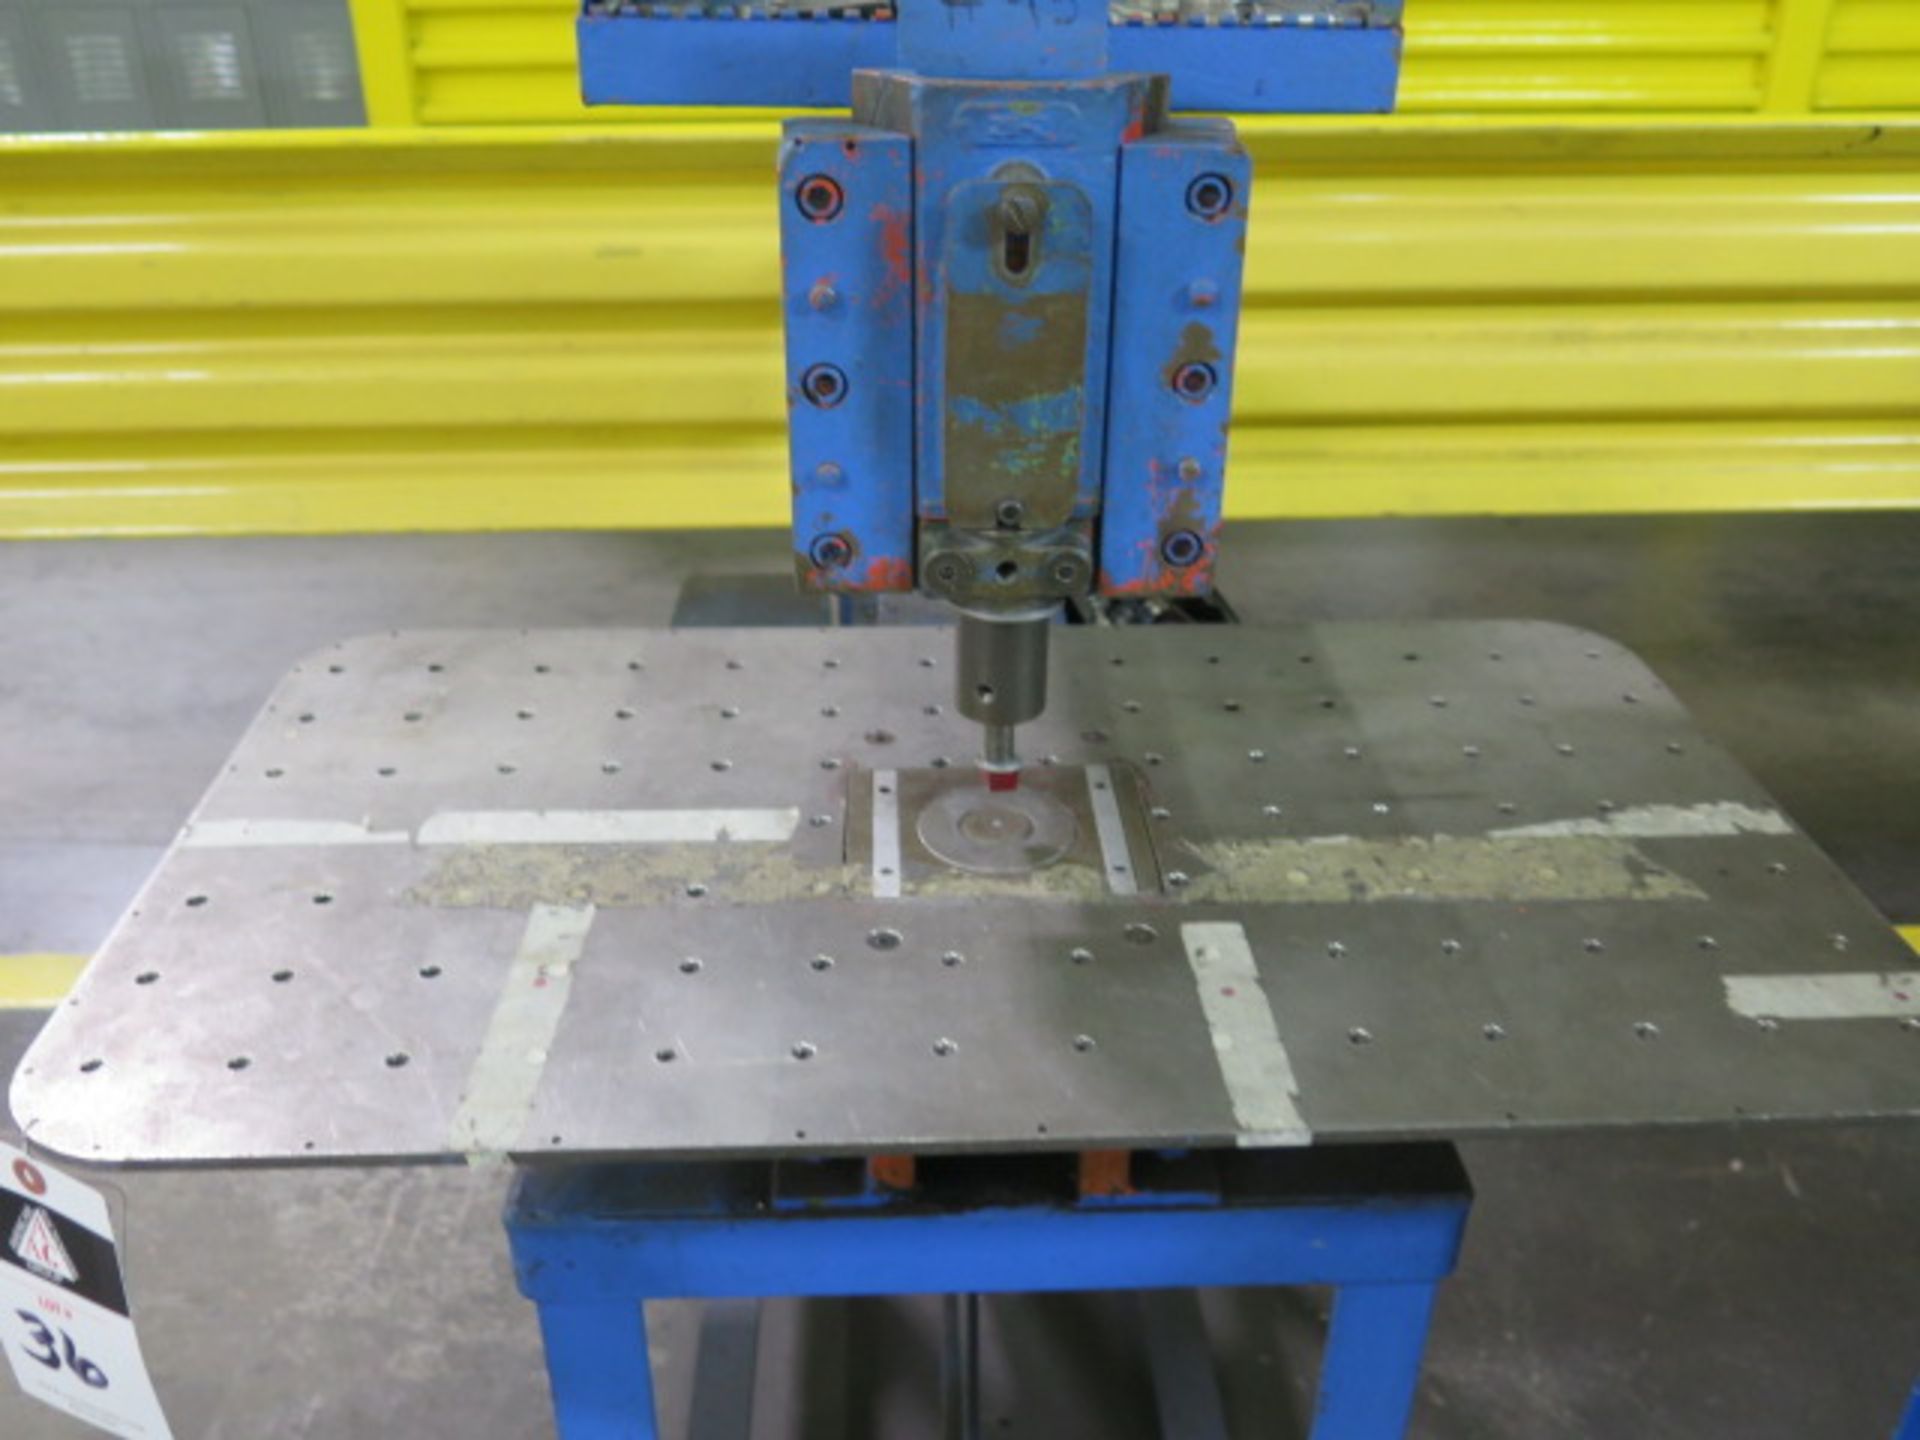 Whitney-Jenson mdl. 59 Kick Punch w/ Punch Tooling (SOLD AS-IS - NO WARRANTY) - Image 3 of 8